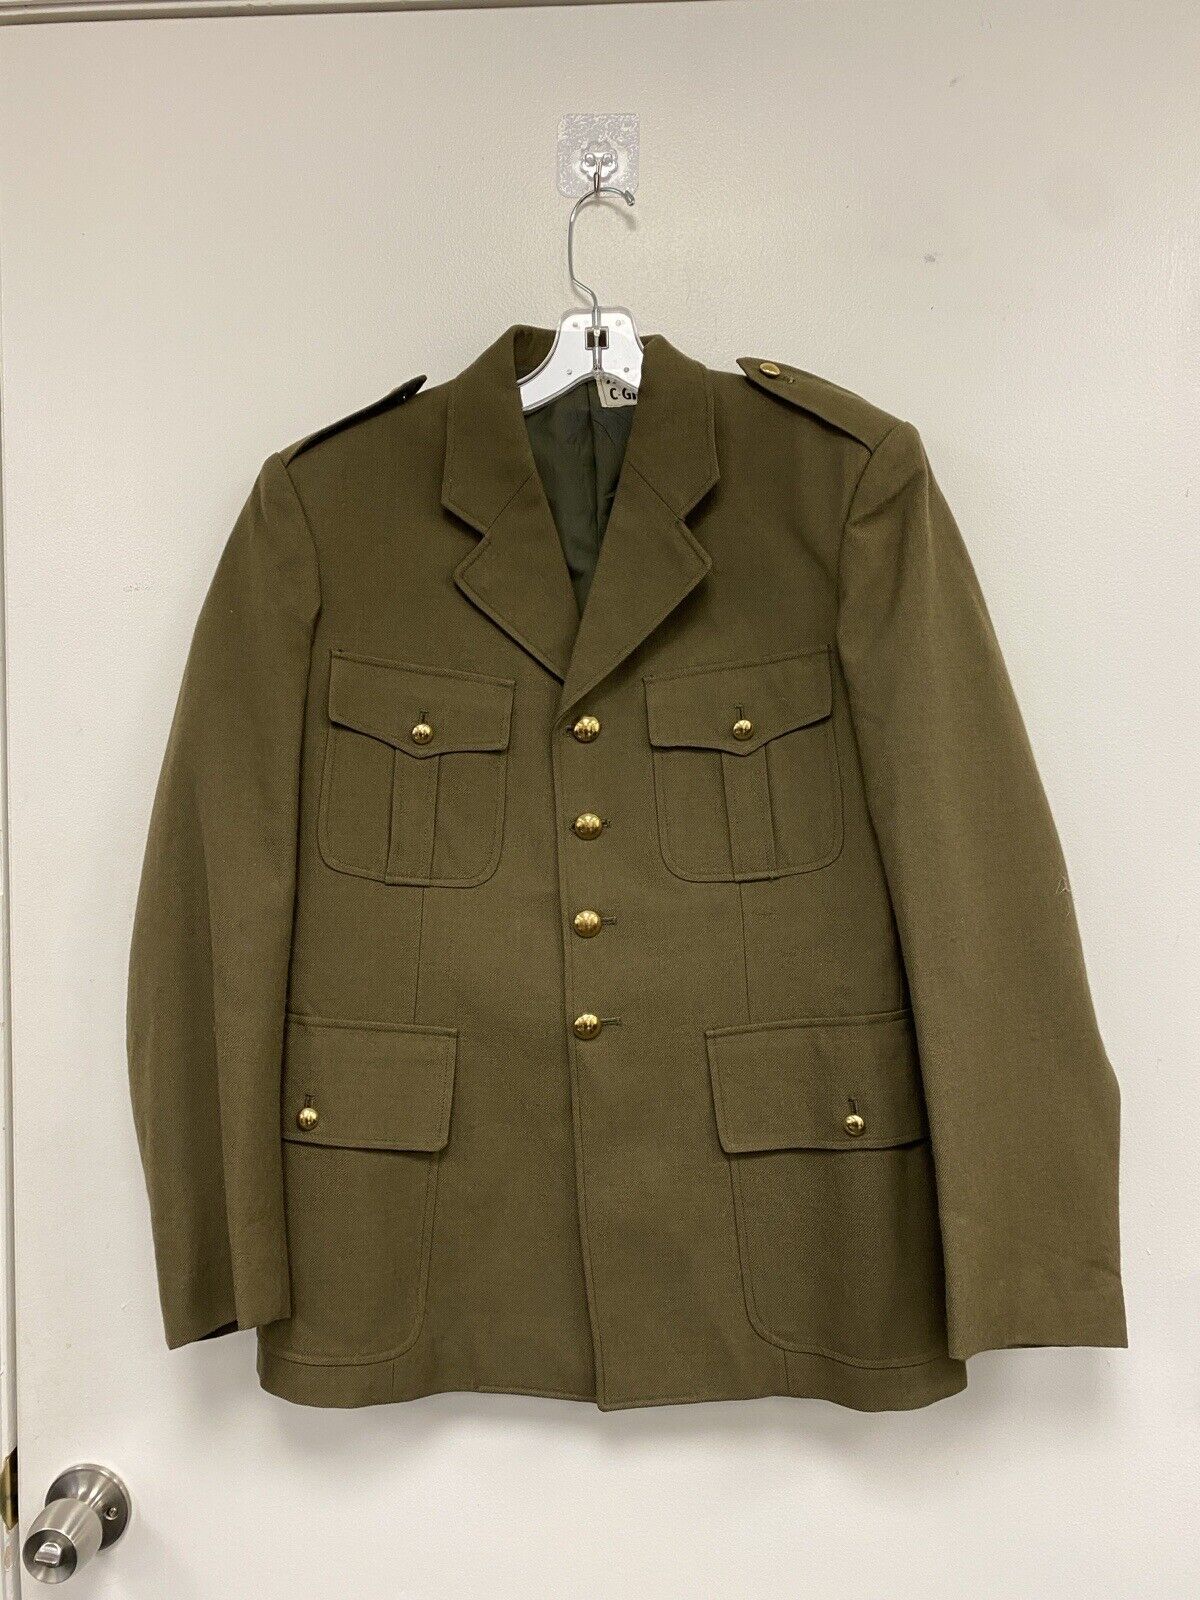 Vintage French Army Jacket - Used